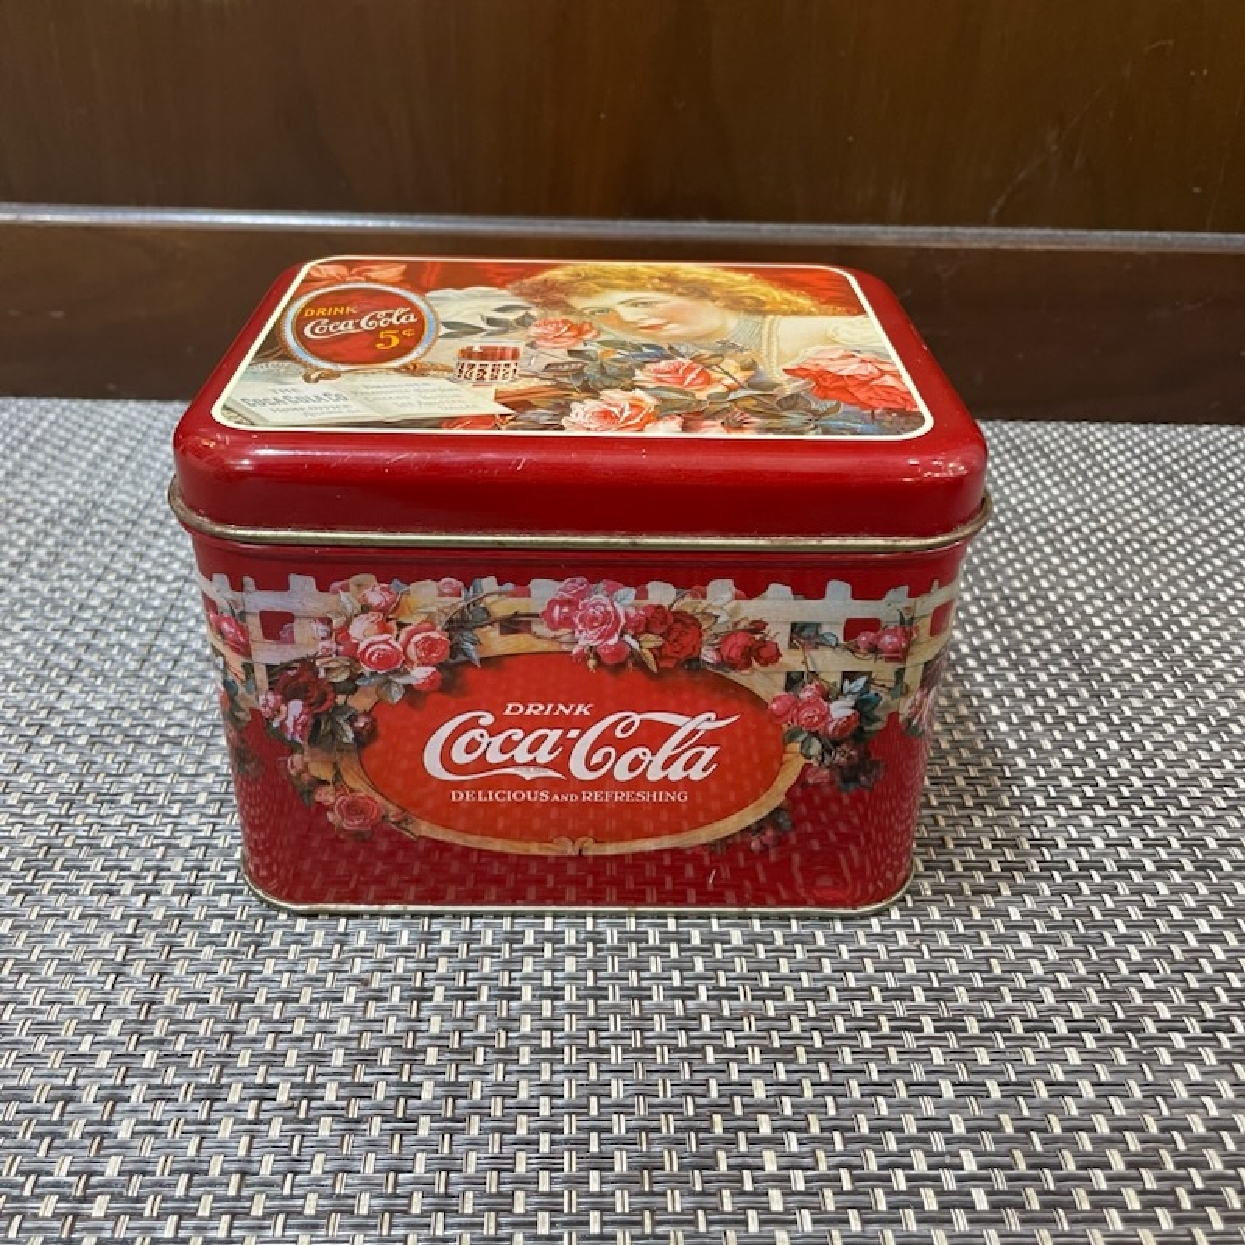 Coca-Cola Tin Box with Flower Imagery 